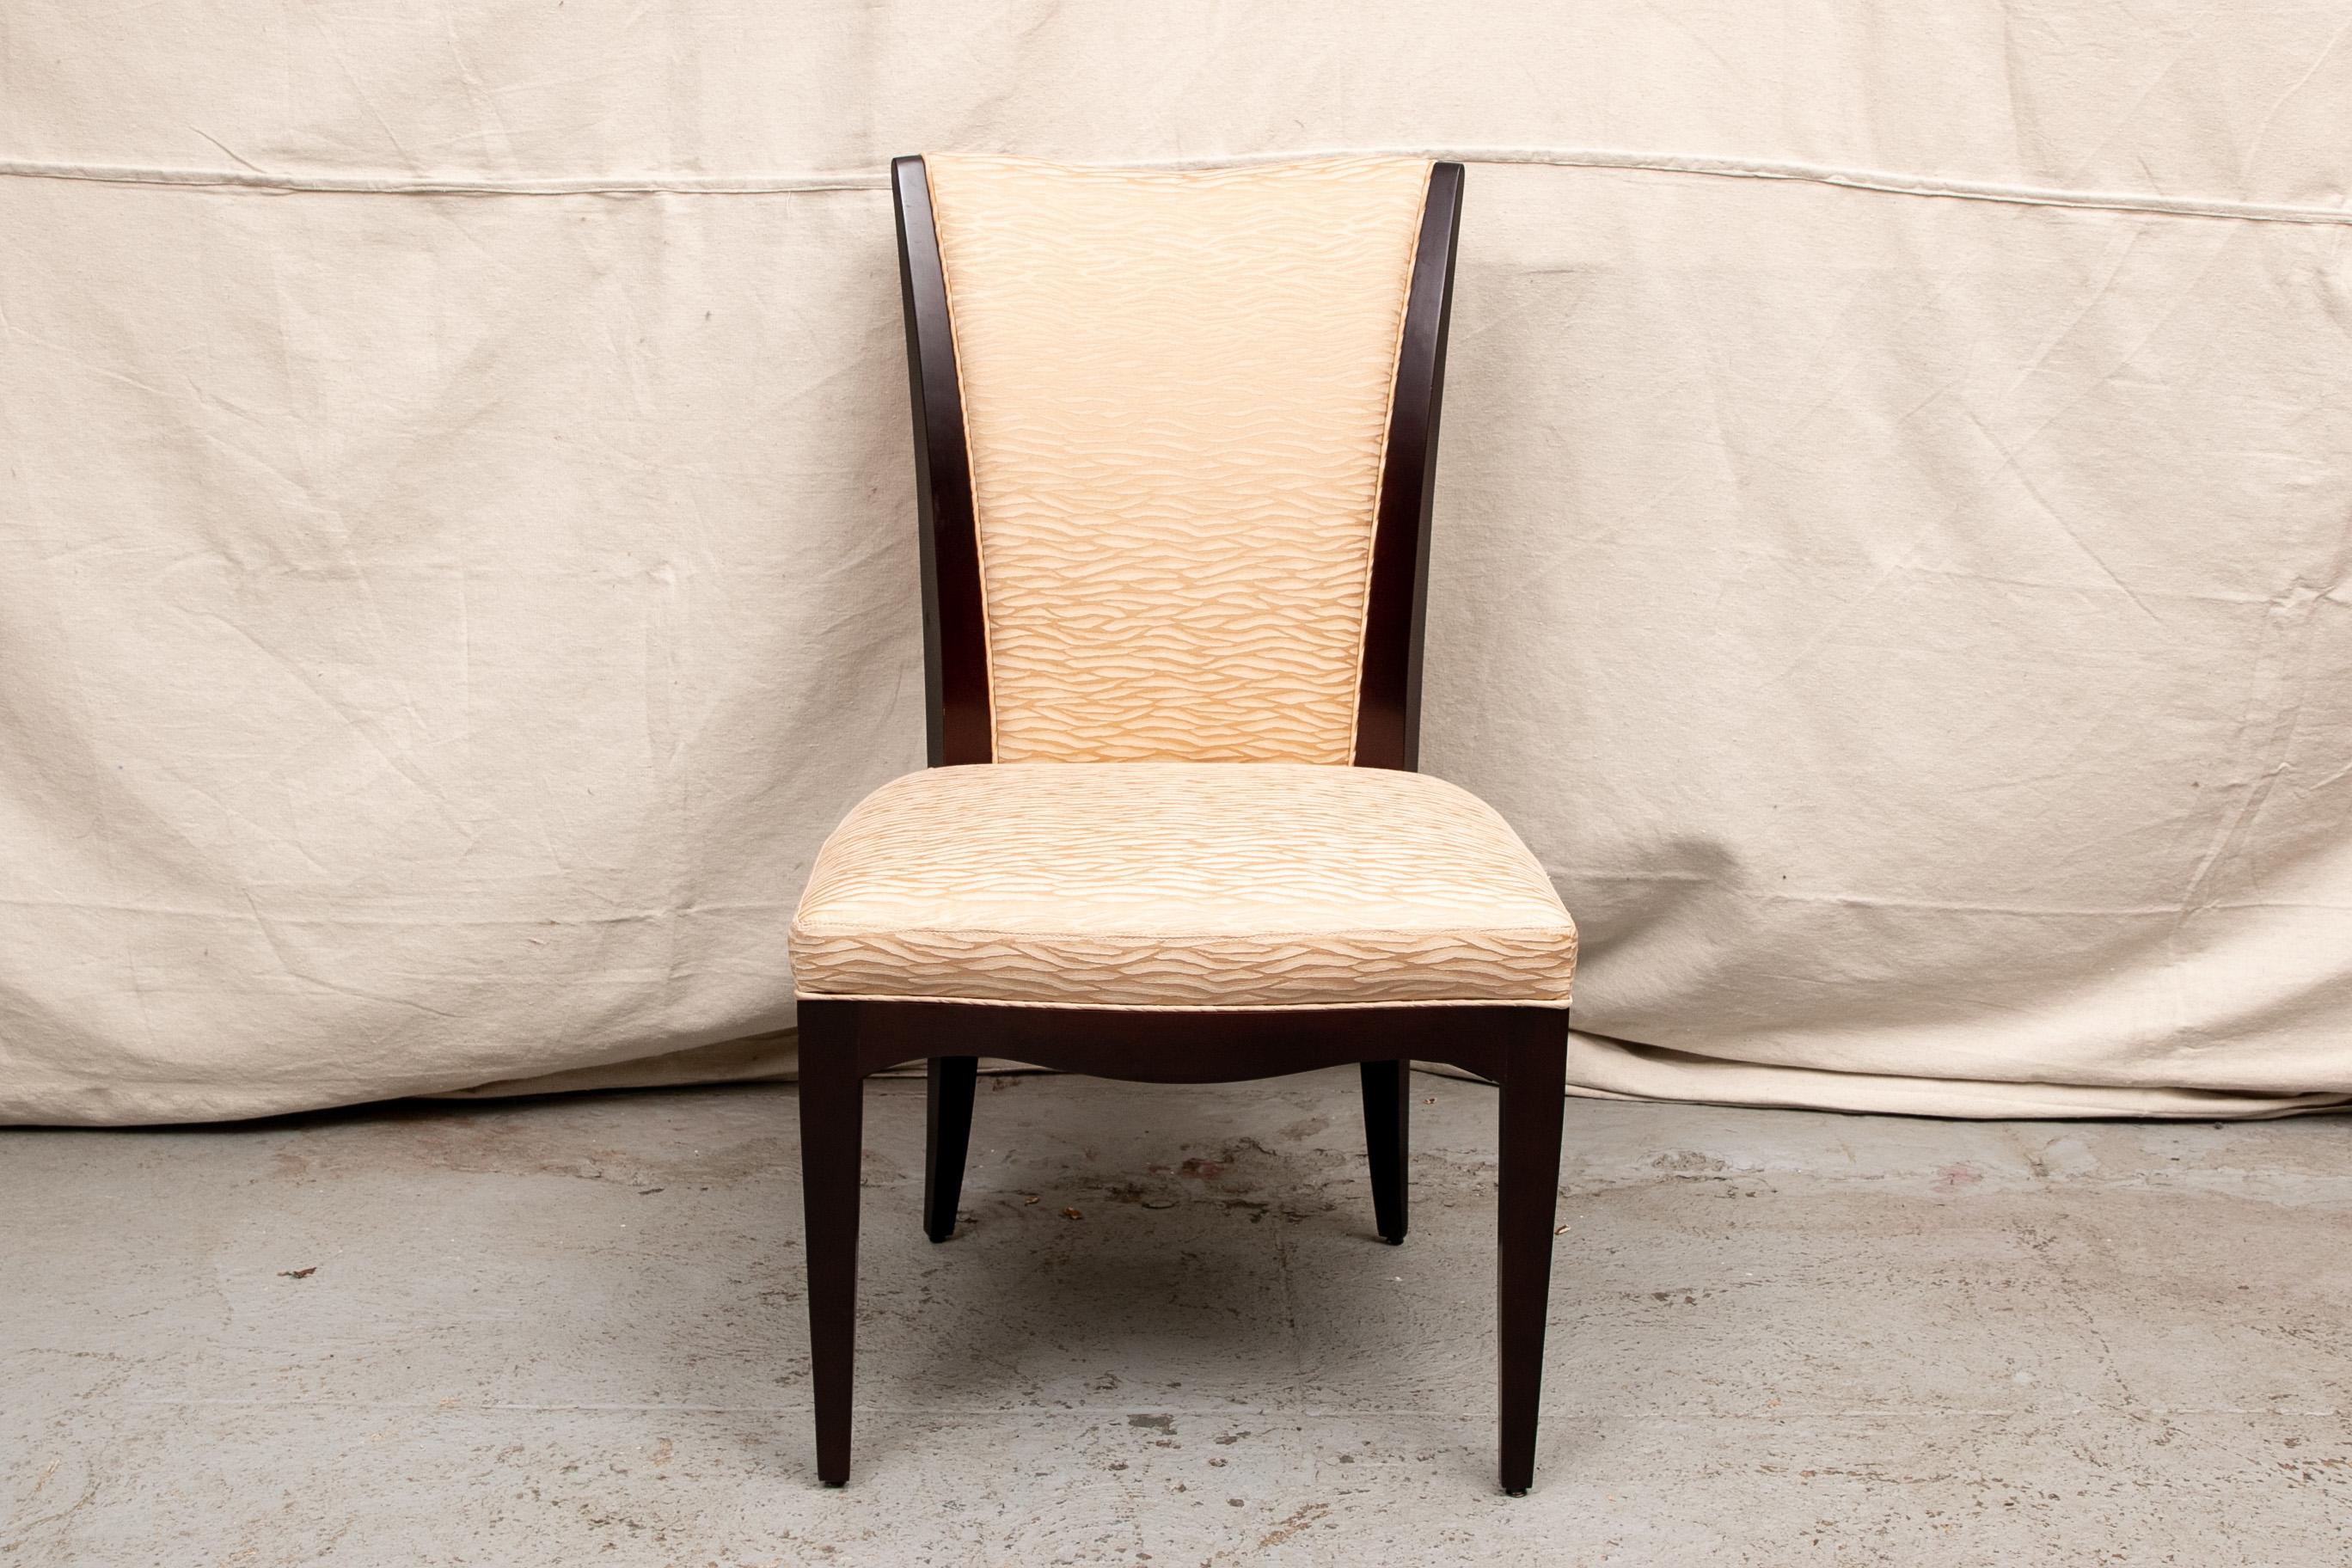 Set of four Barbara Barry for Baker Furniture upholstered side chairs, contrasting peach damask upholstery seat and backrest inset in a mahogany frame, marked on underside with both manufacturer's labels.

Condition: Good condition with light